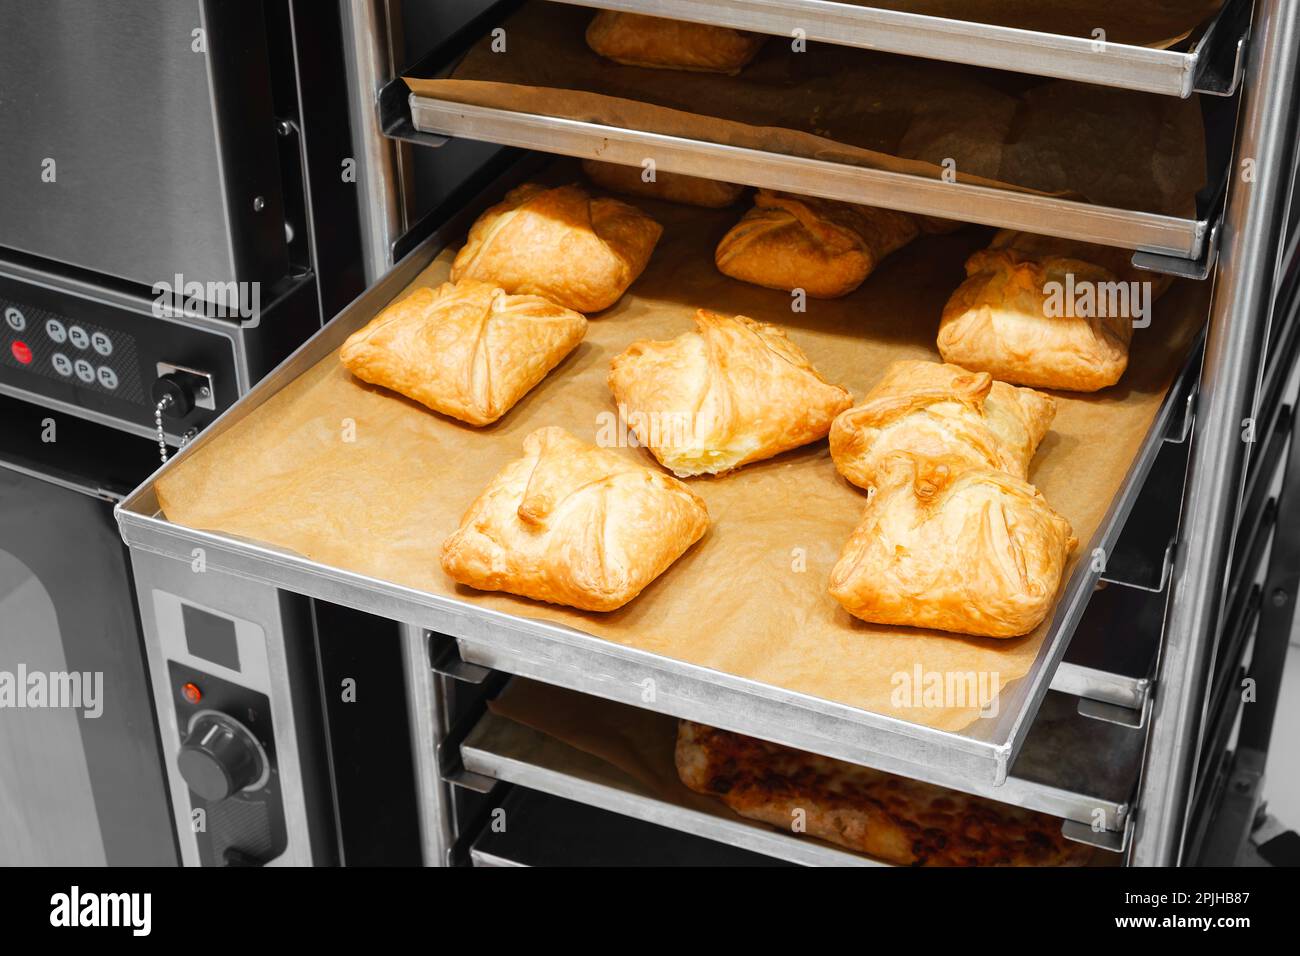 Delicious bread buns in a bakery or supermarket Stock Photo